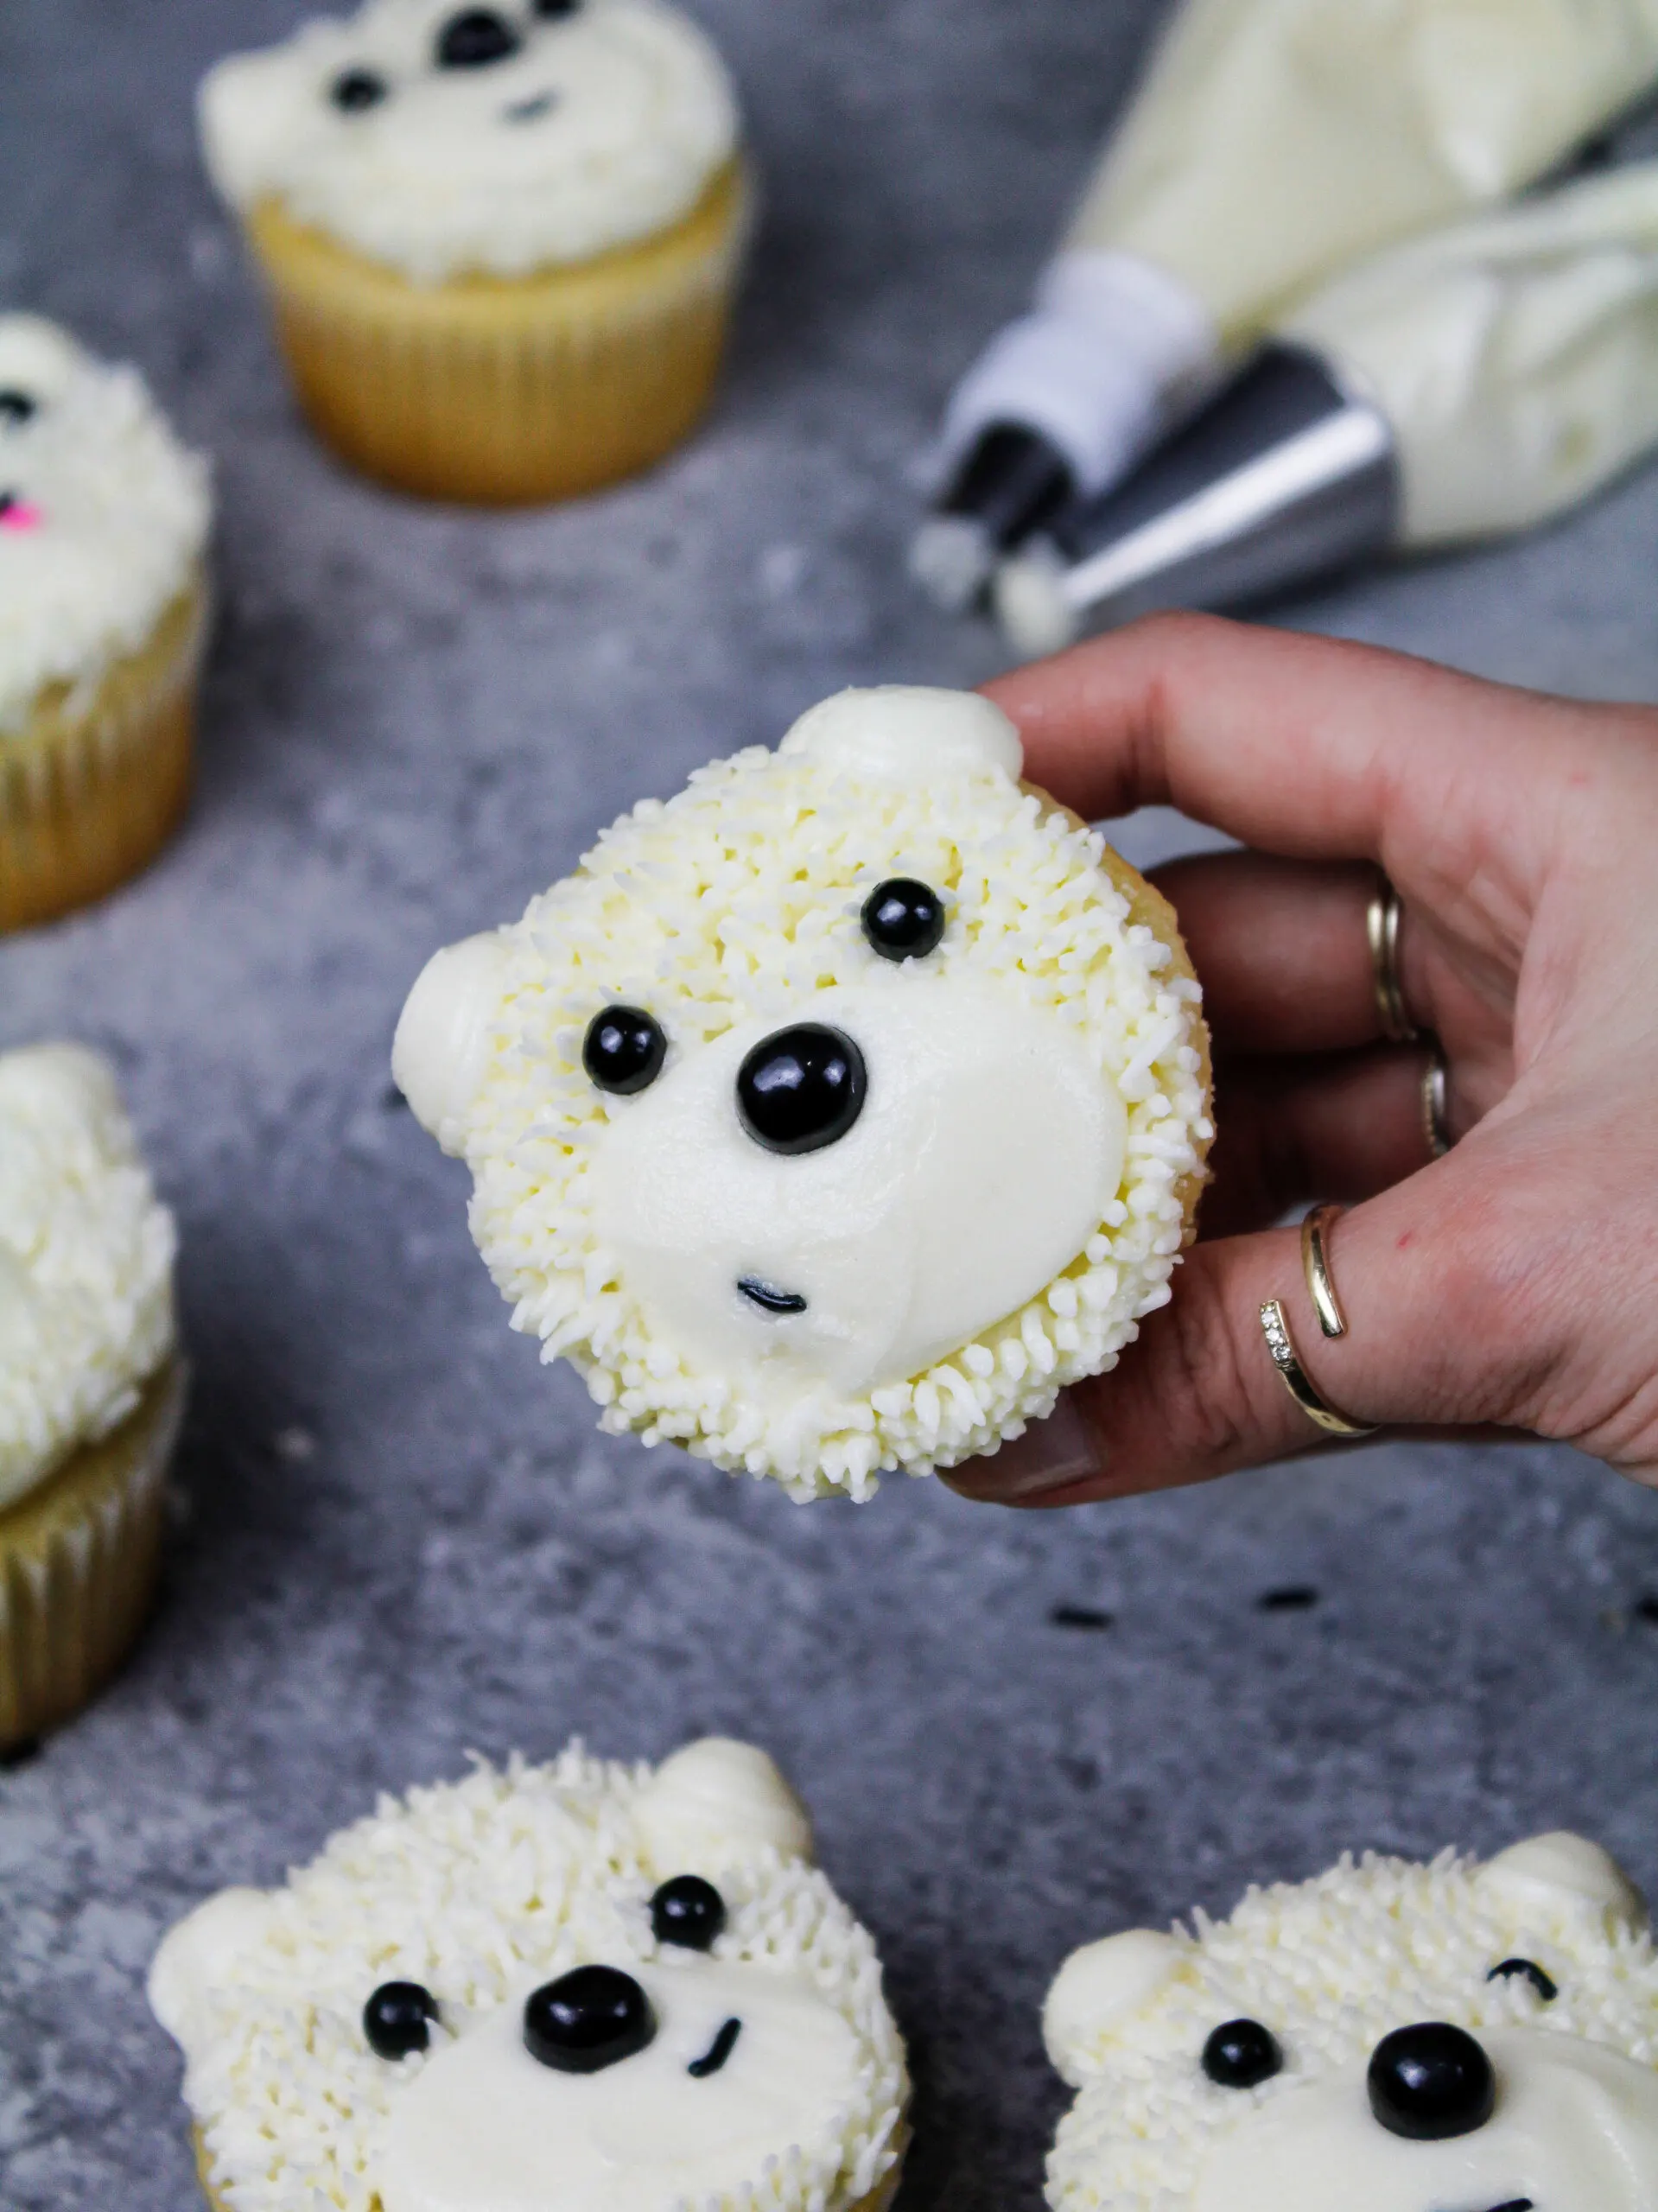 image of adorable polar bear cupcakes made with buttercream frosting and black sprinkles